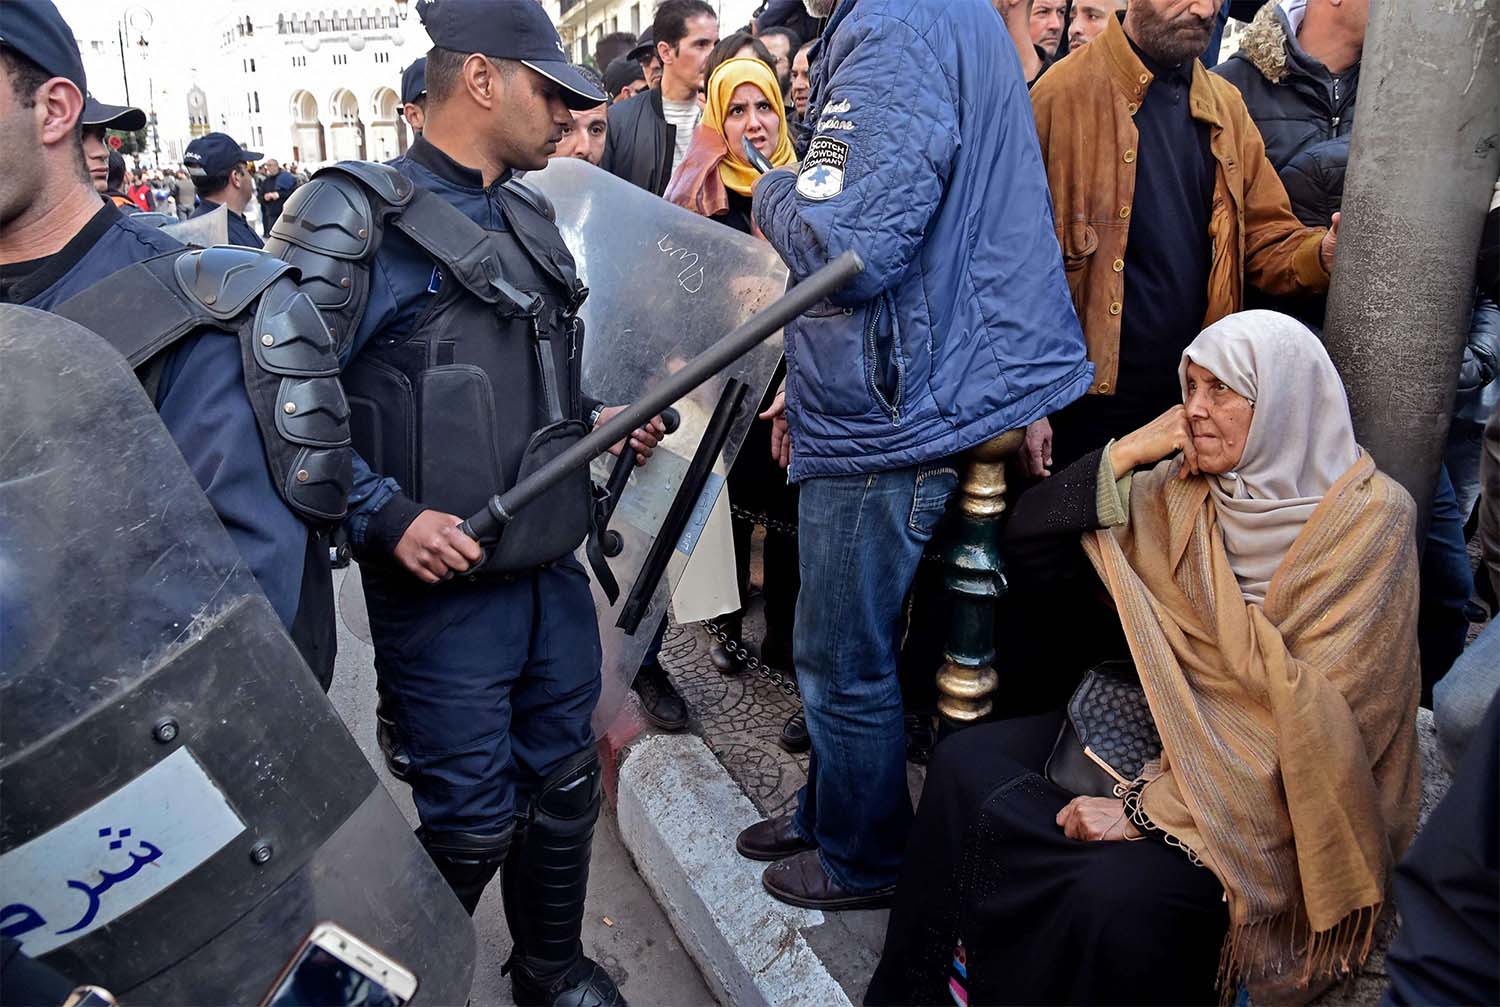 Algerian Authorities have made about 200 arrests linked to the protests since the country's coronavirus restrictions came into effect three months ago